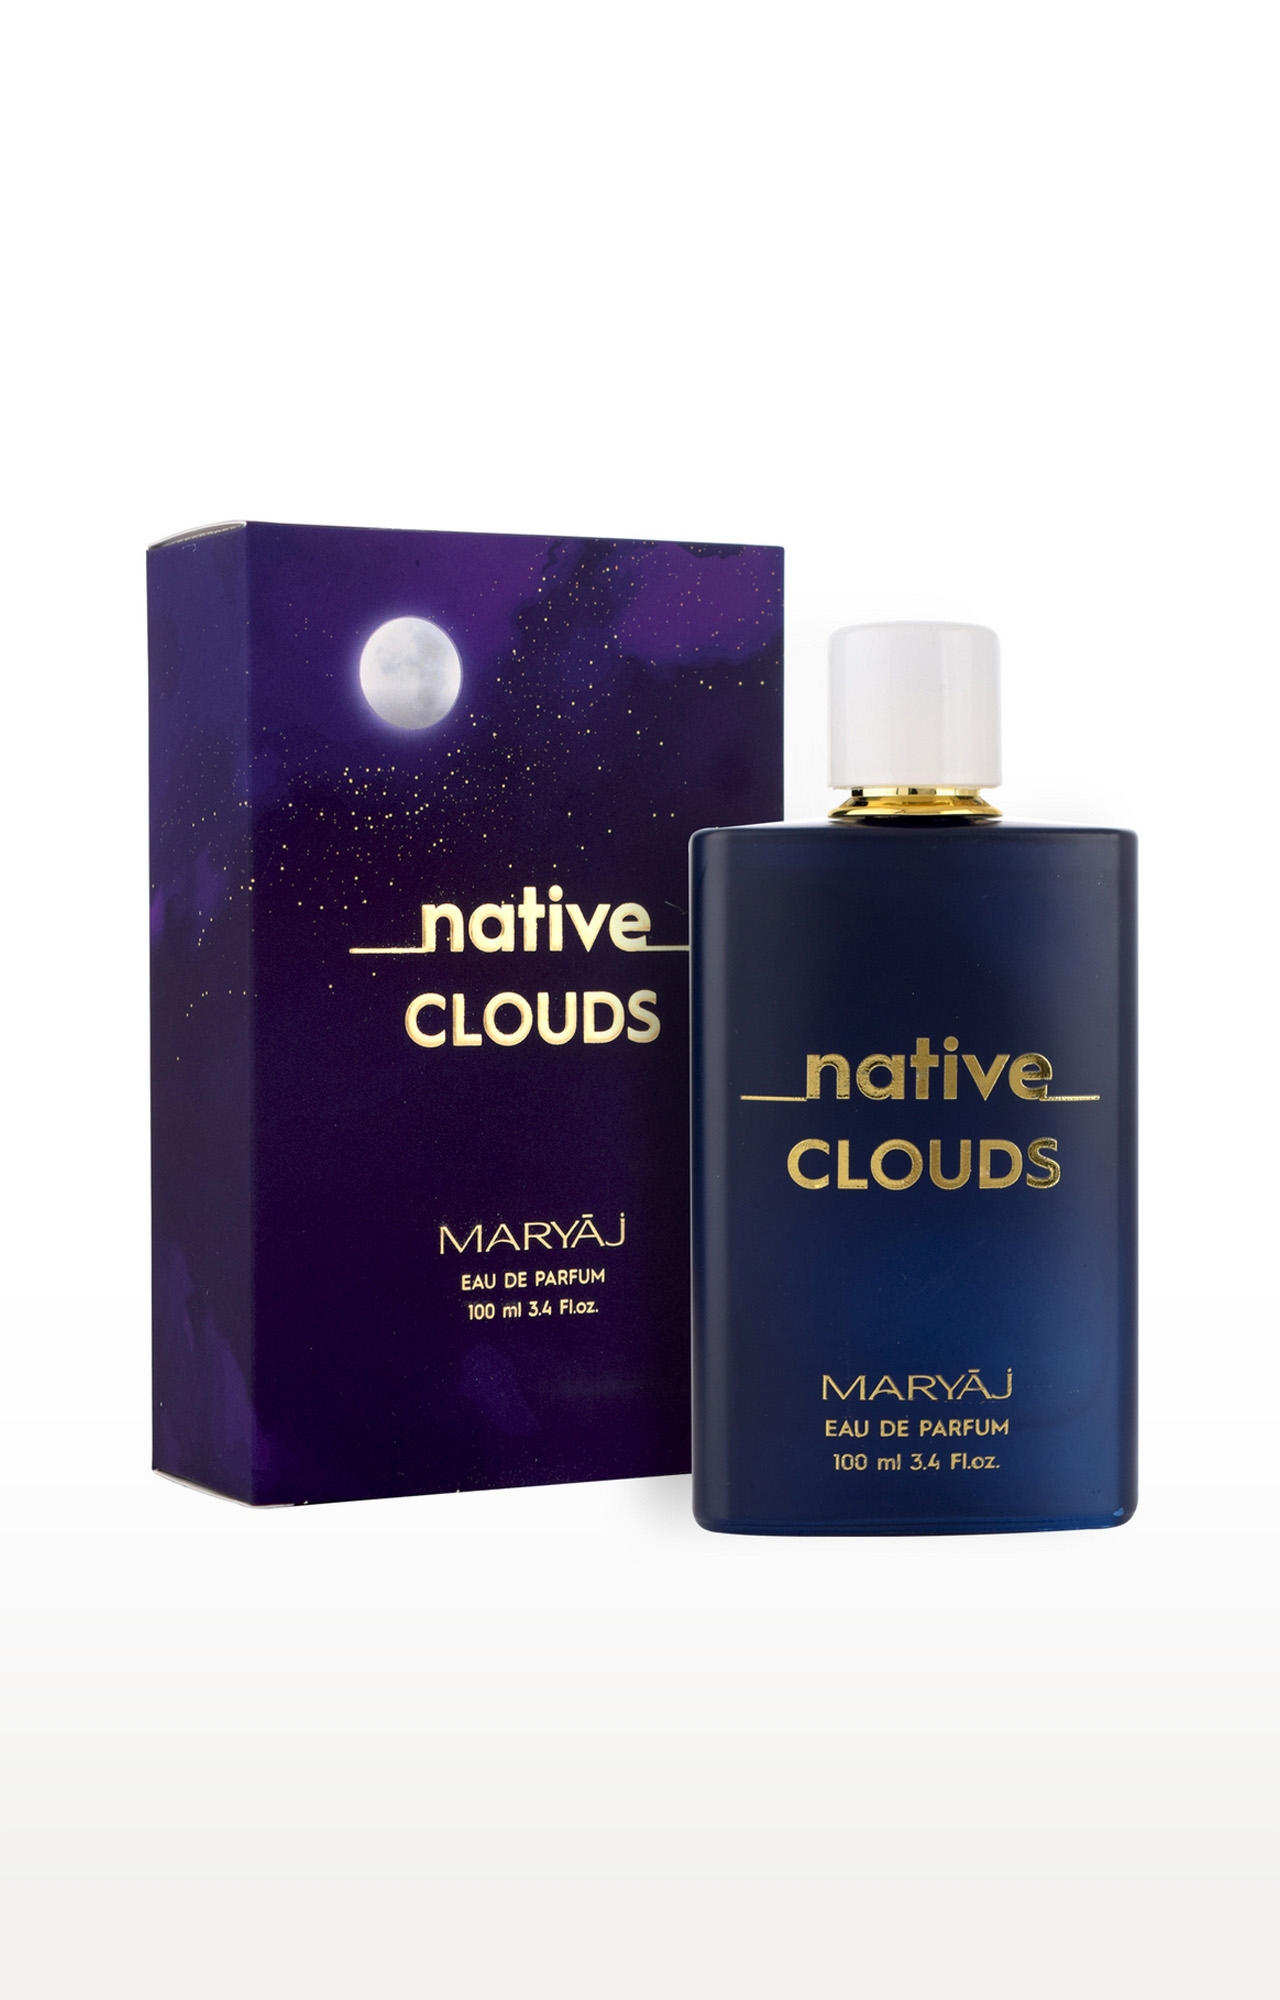 Maryaj Native Clouds Gift for Man and Women Eau De Parfume 100ML Long Lasting Scent Spray Gift for Man and Women